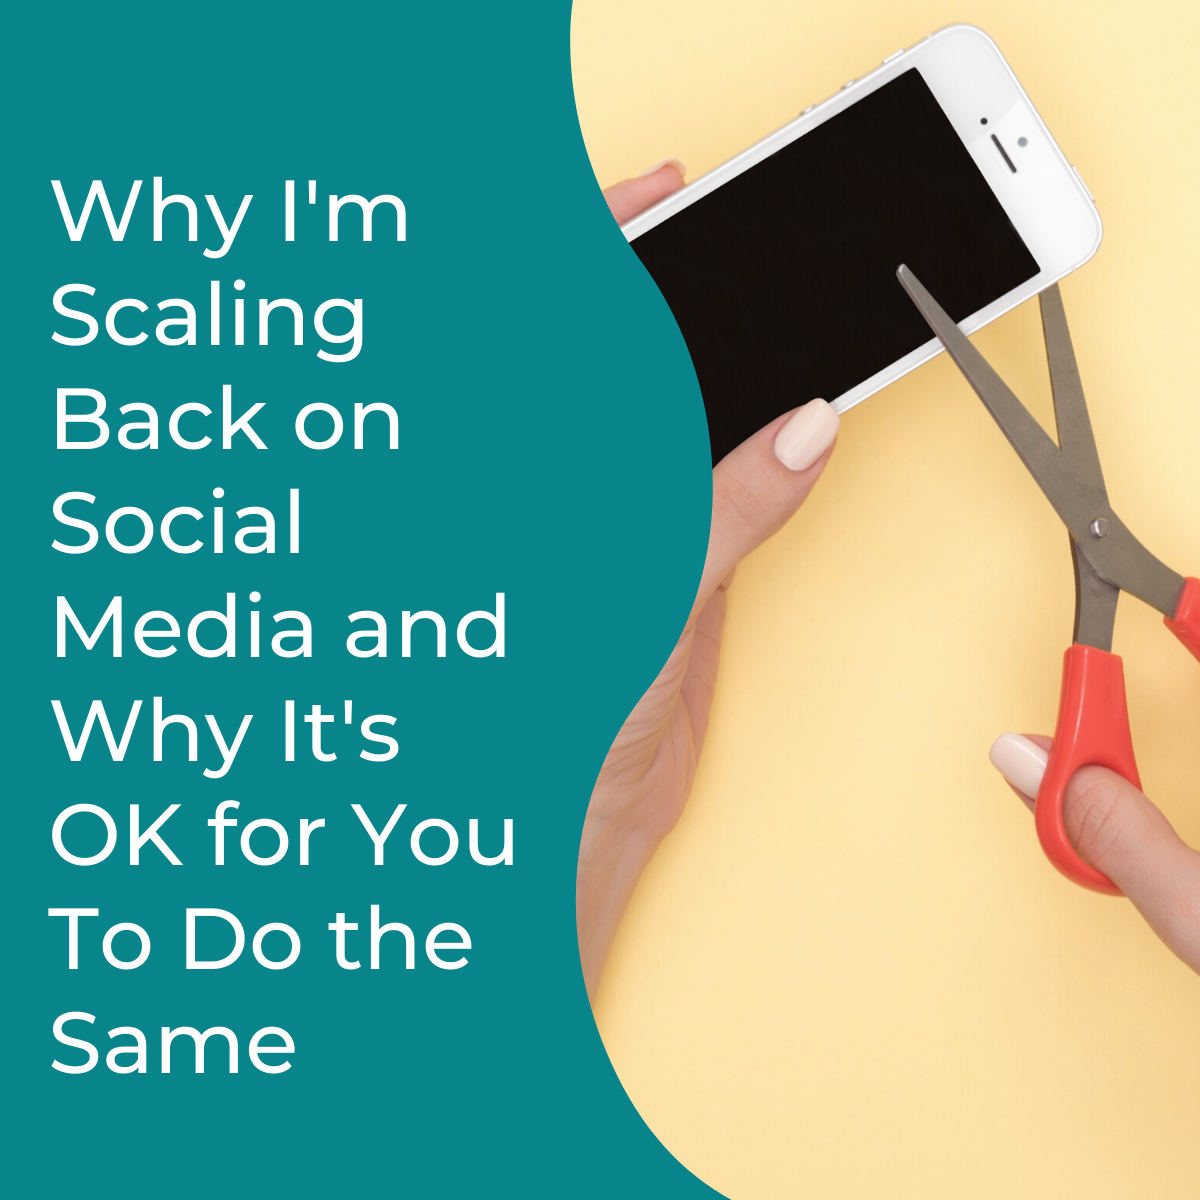 You are currently viewing Why I’m Scaling Back on Social Media and Why It’s OK for You To Do the Same